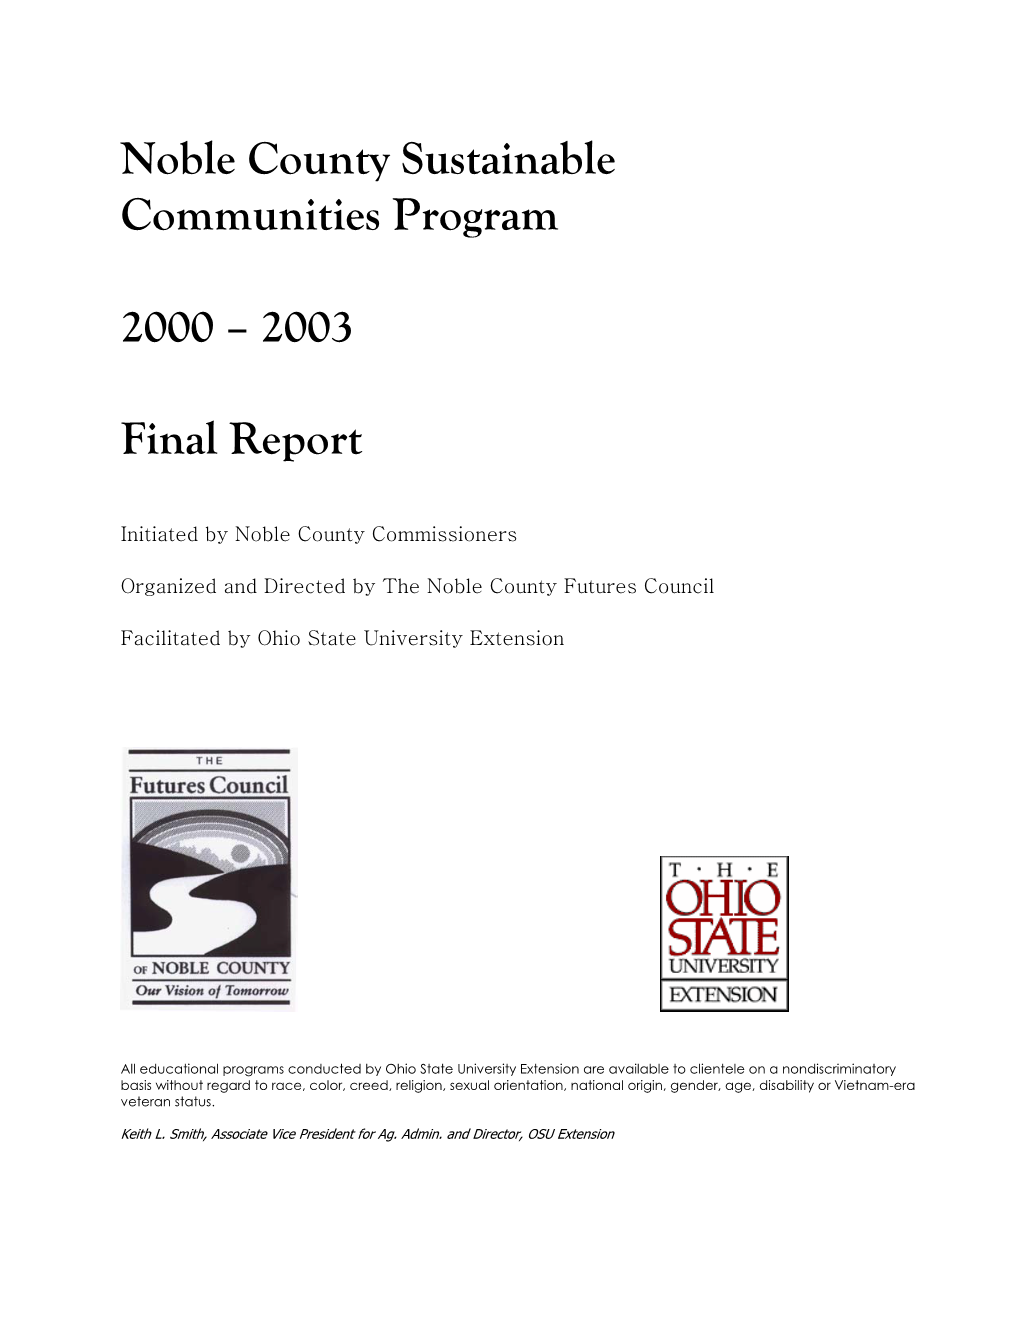 Noble County Sustainable Communities Program 2000 – 2003 Final Report